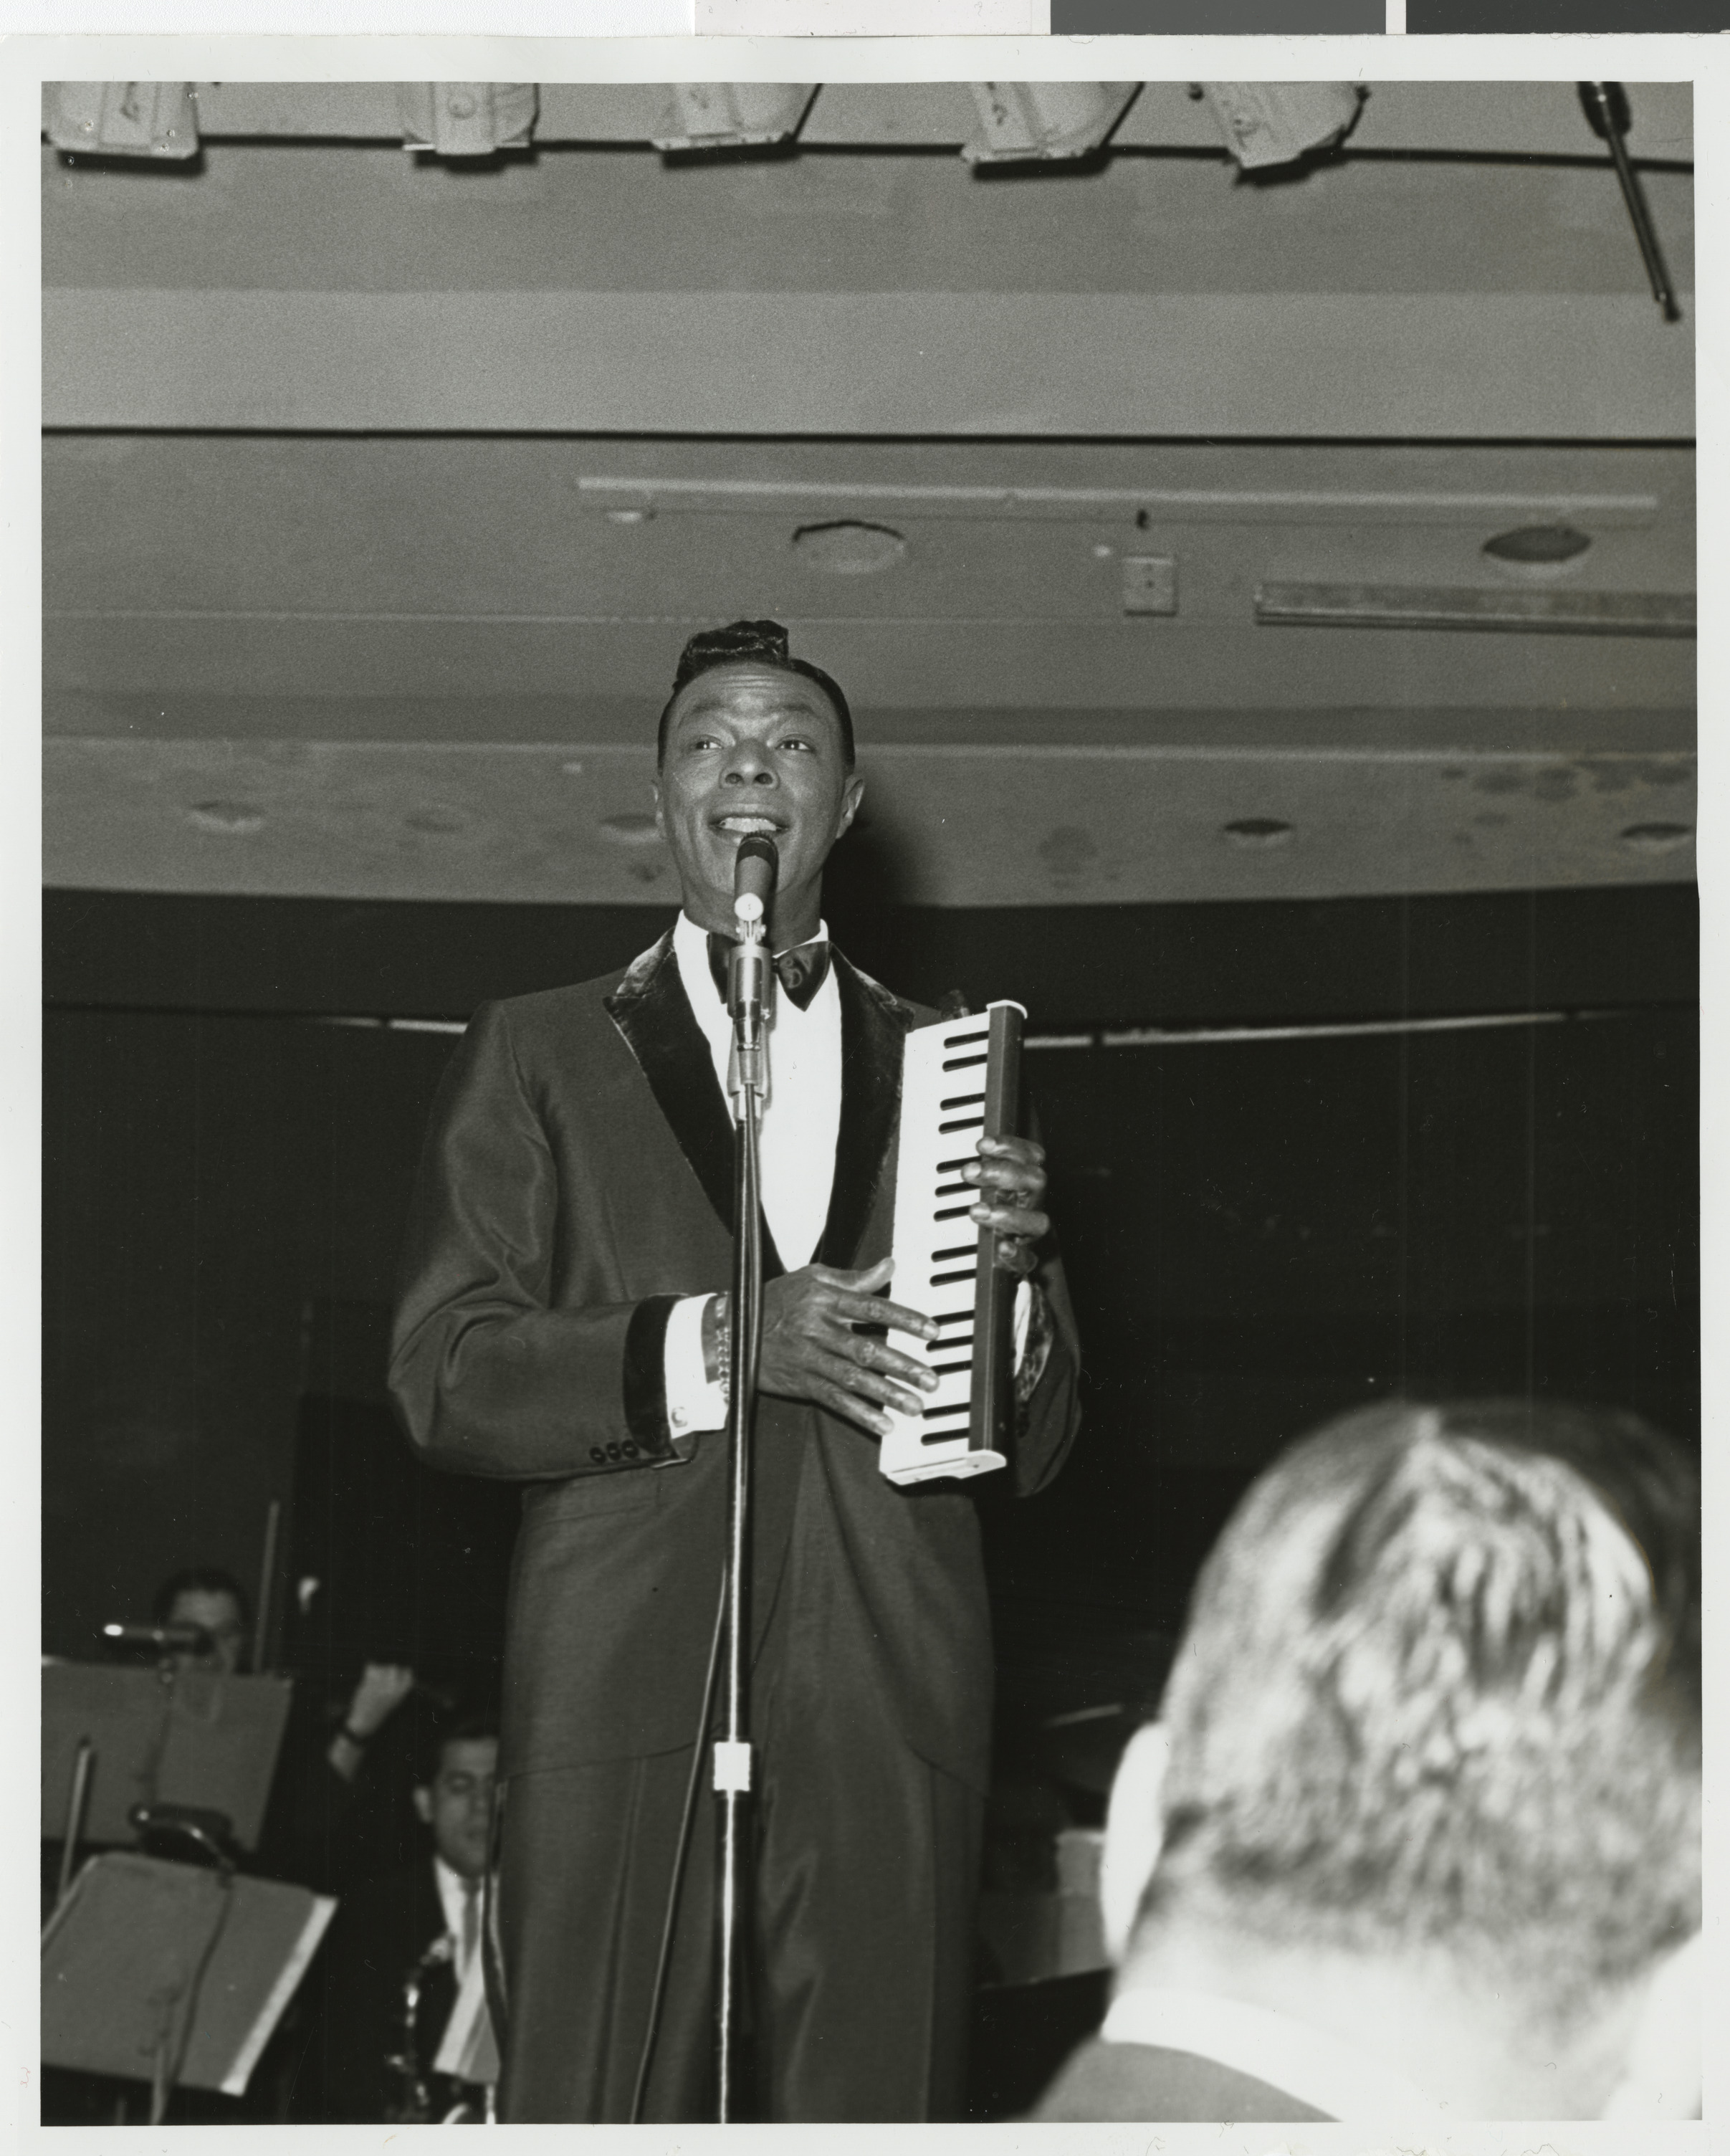 Cole onstage, image 003